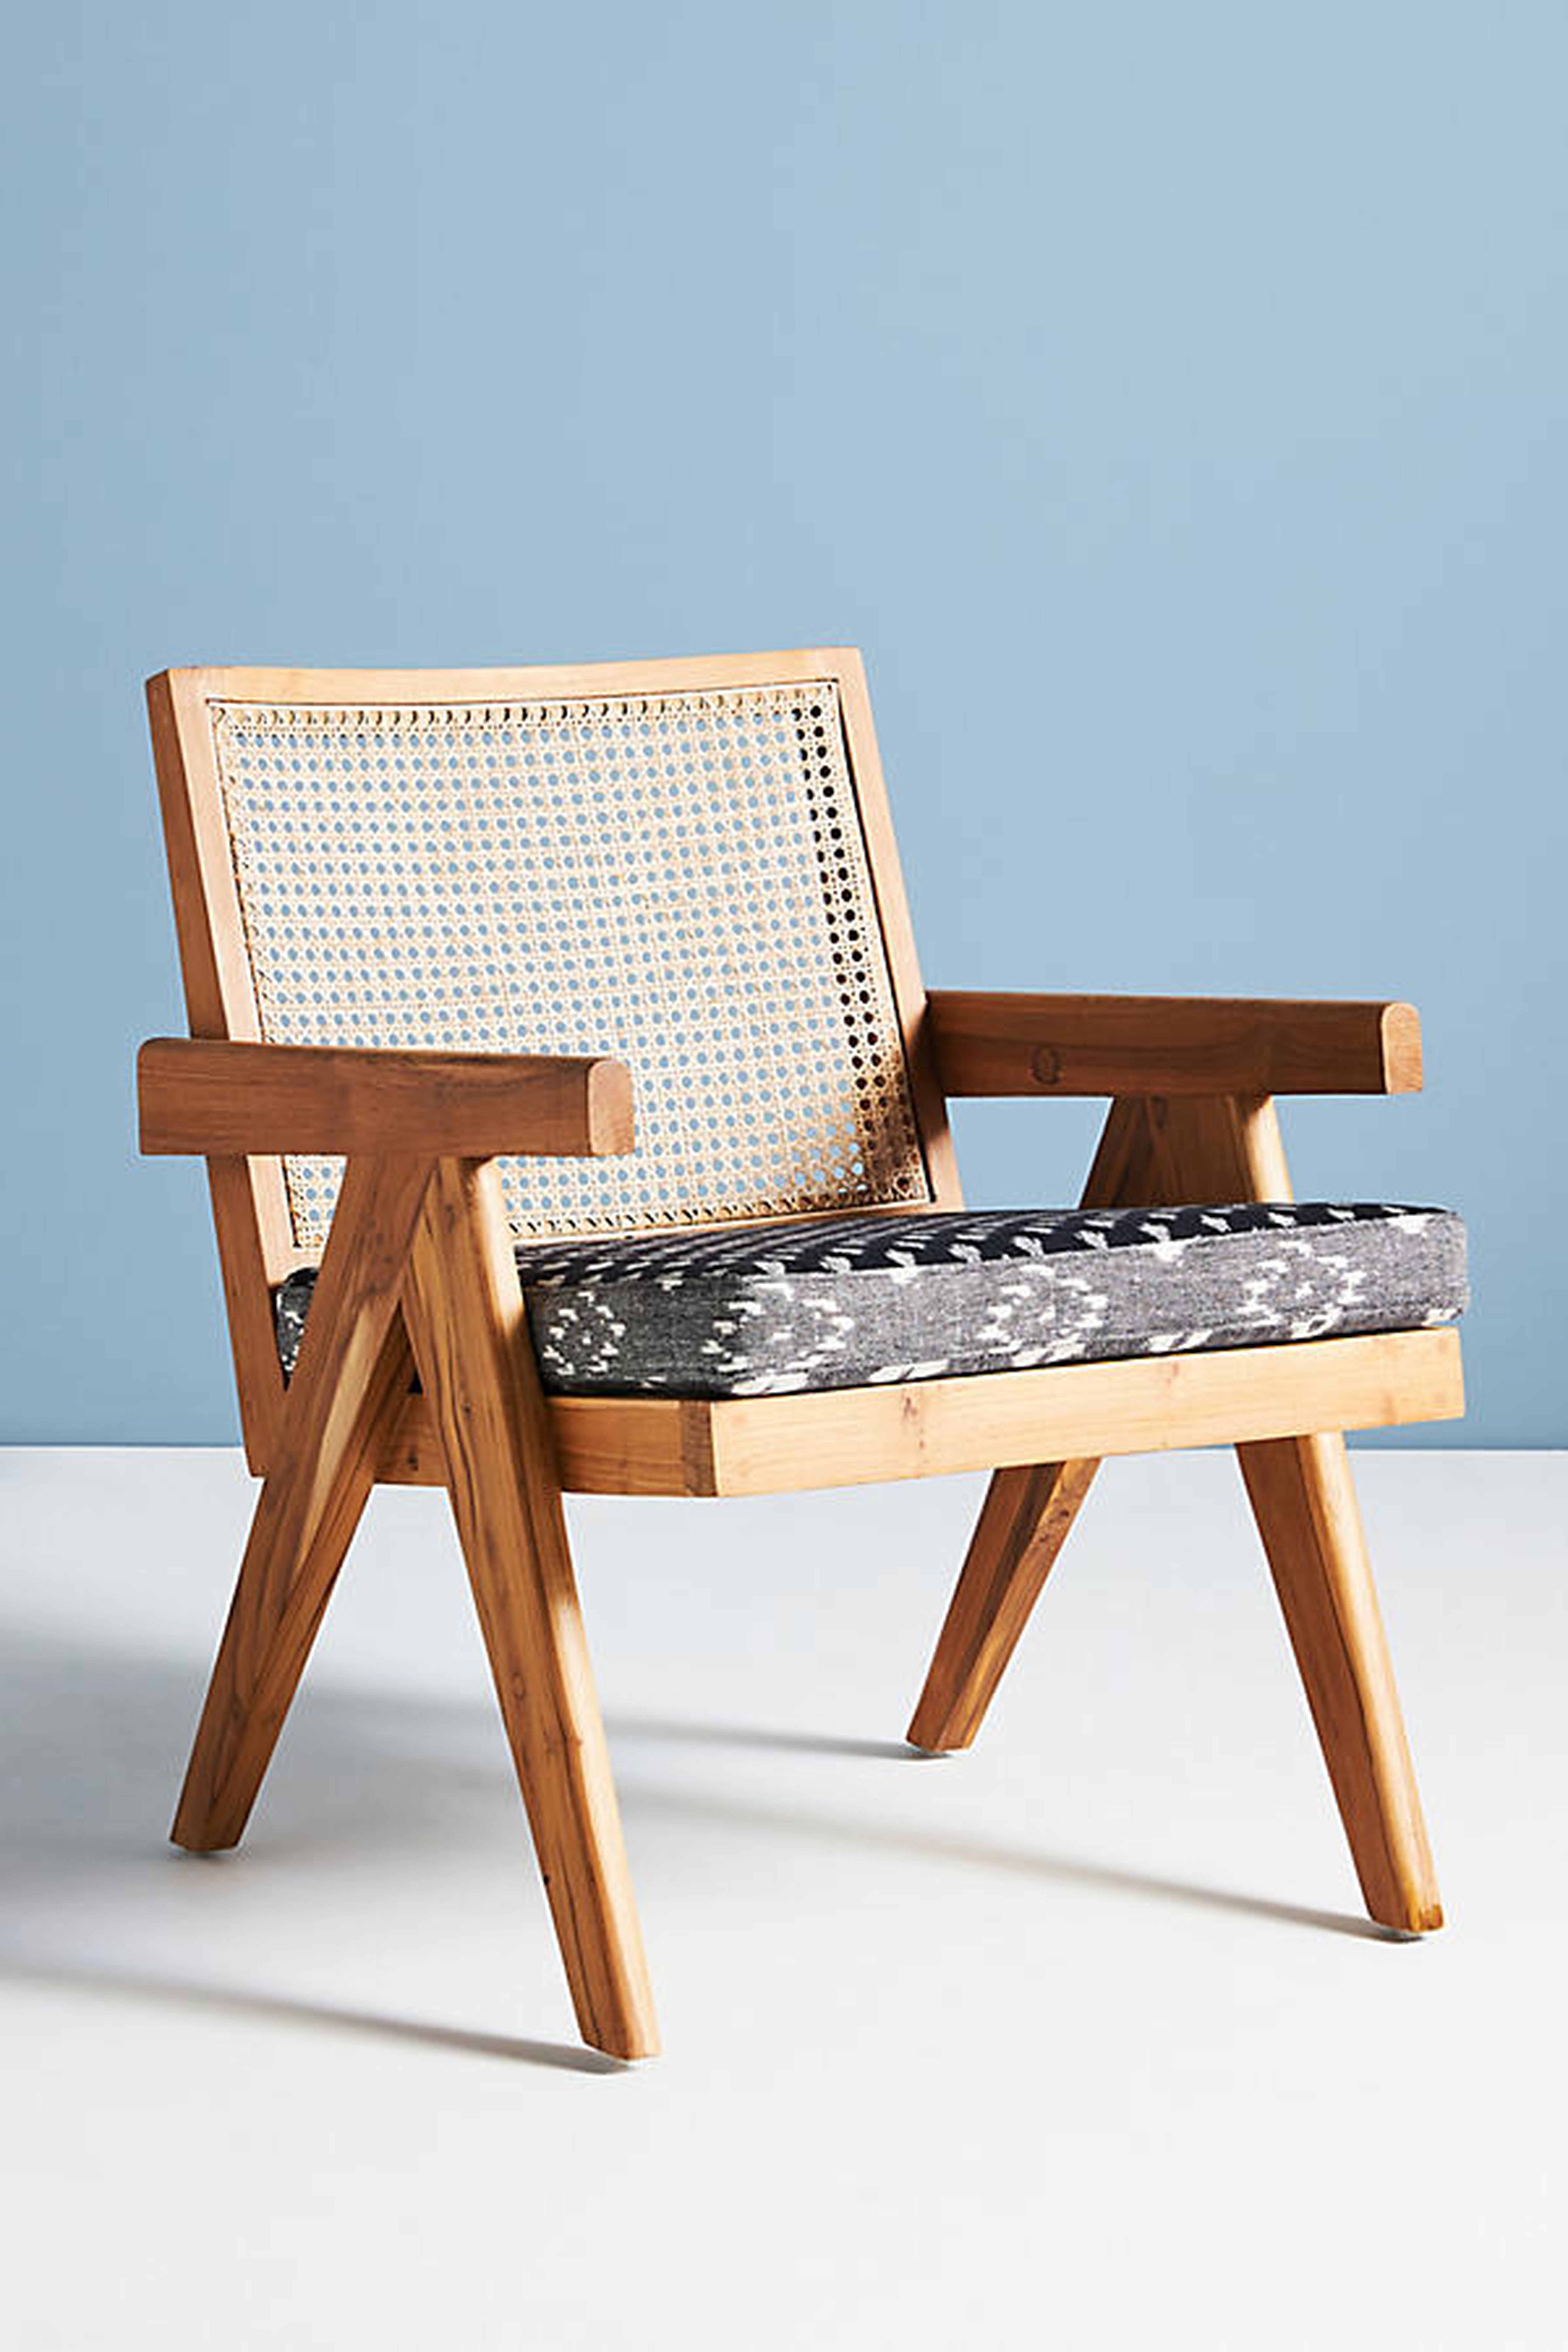 Ashton Caned Teak Accent Chair By Anthropologie in Black - Anthropologie